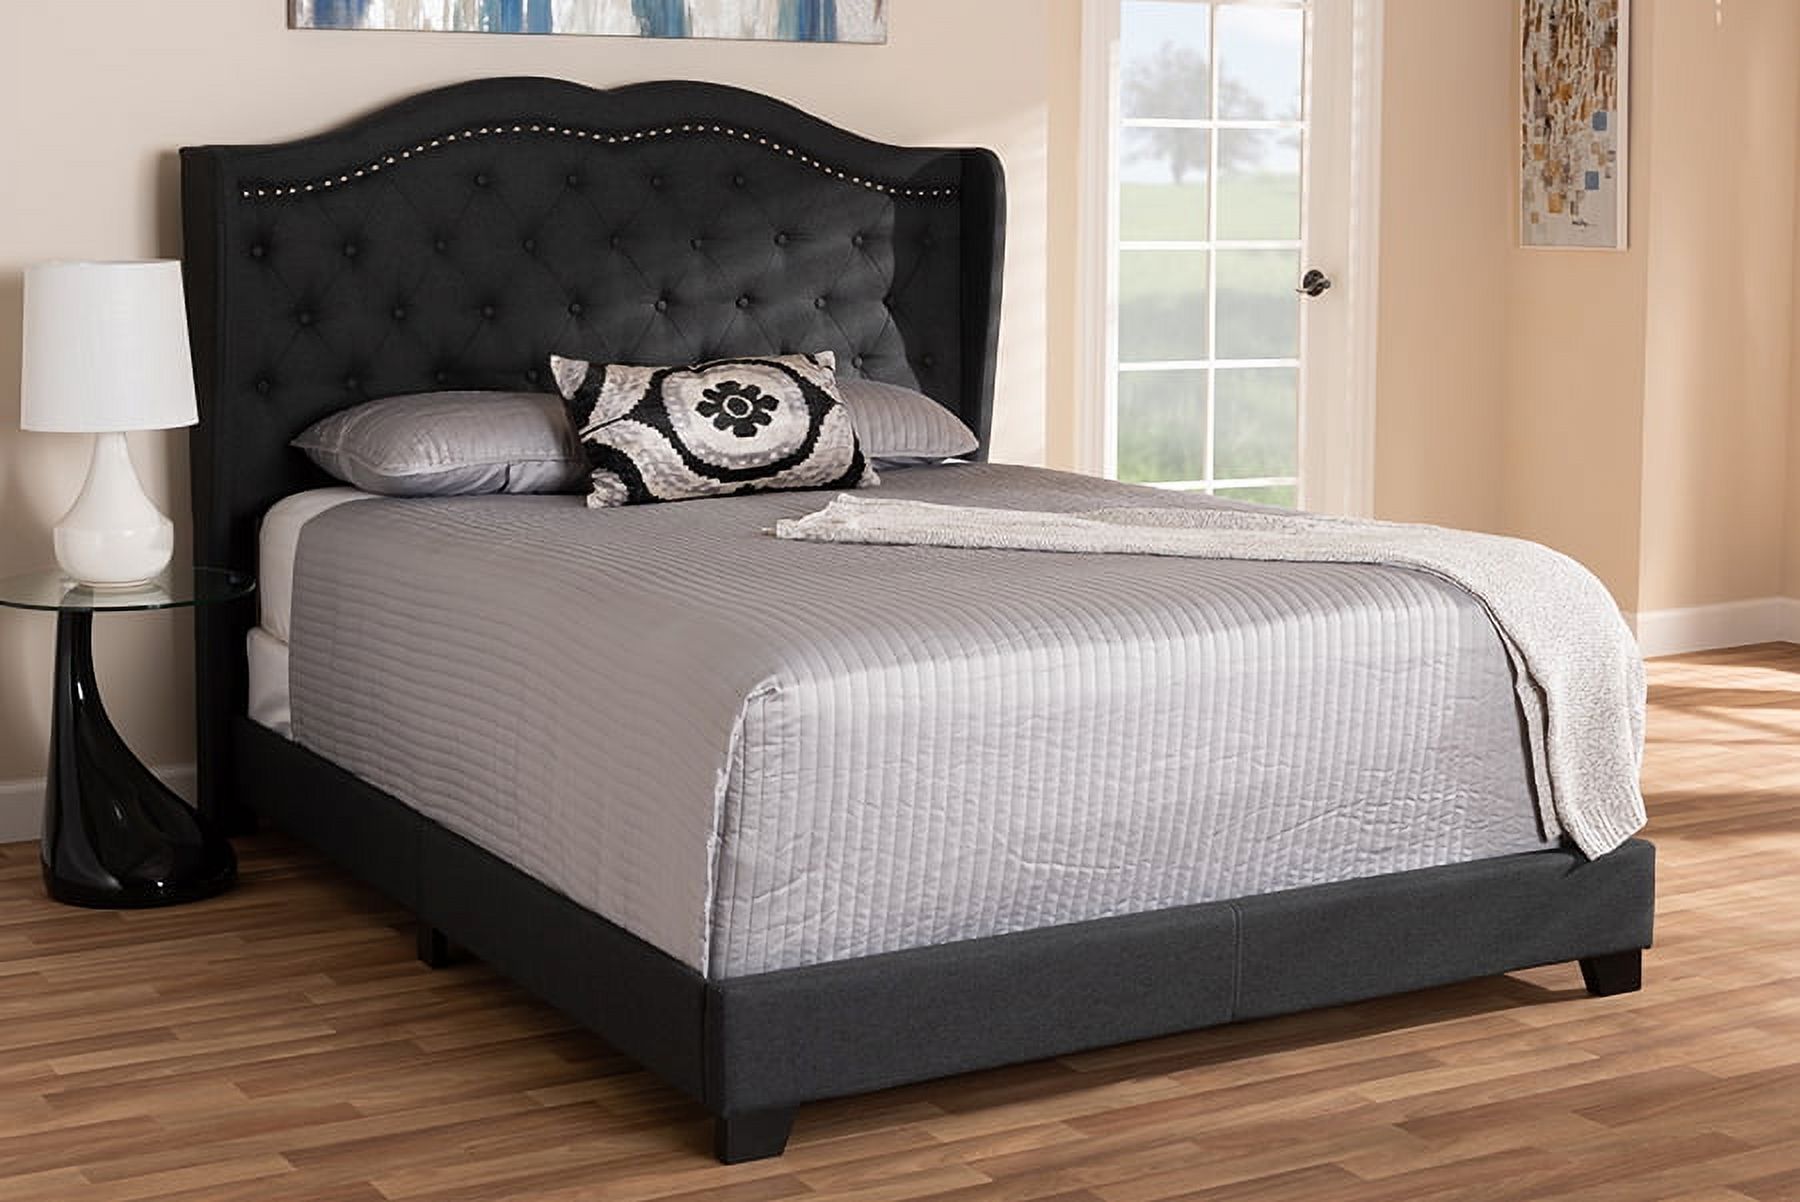 Baxton Studio Aden Modern and Contemporary Charcoal Grey Fabric Upholstered Queen Size Bed - image 1 of 6